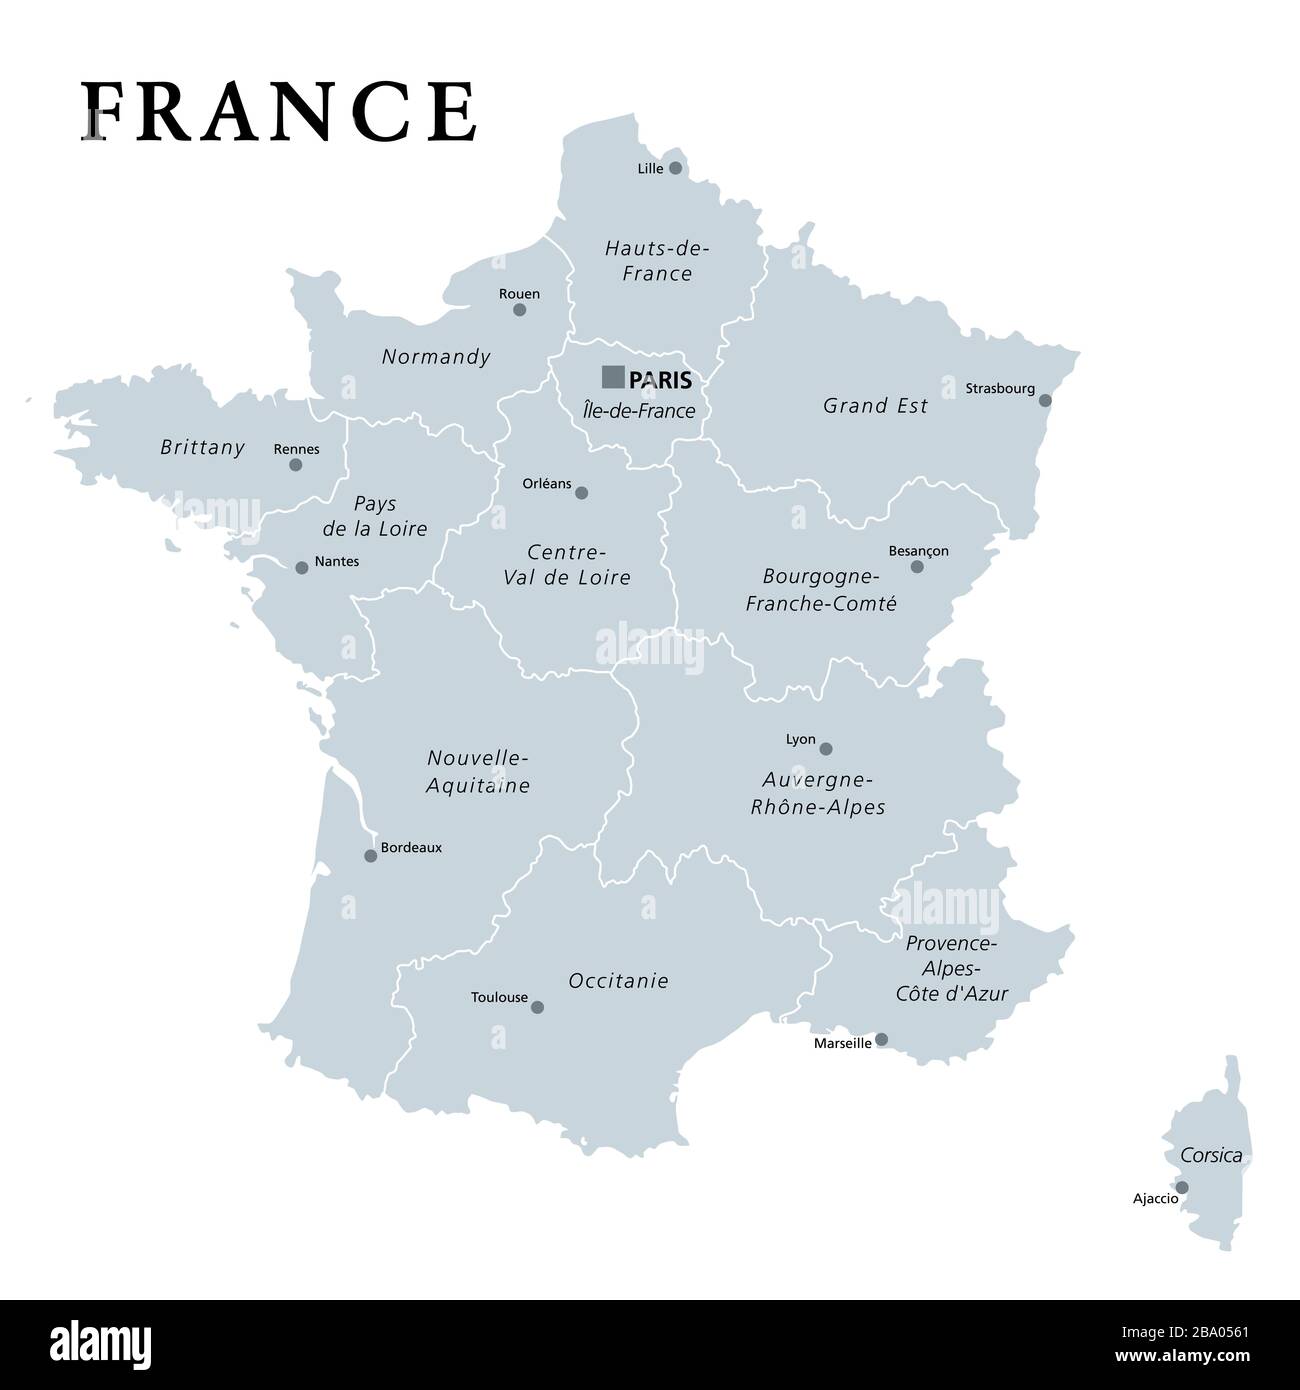 France, gray political map. Regions of Metropolitan France. French Republic, capital Paris, administrative regions and prefectures. Stock Photo